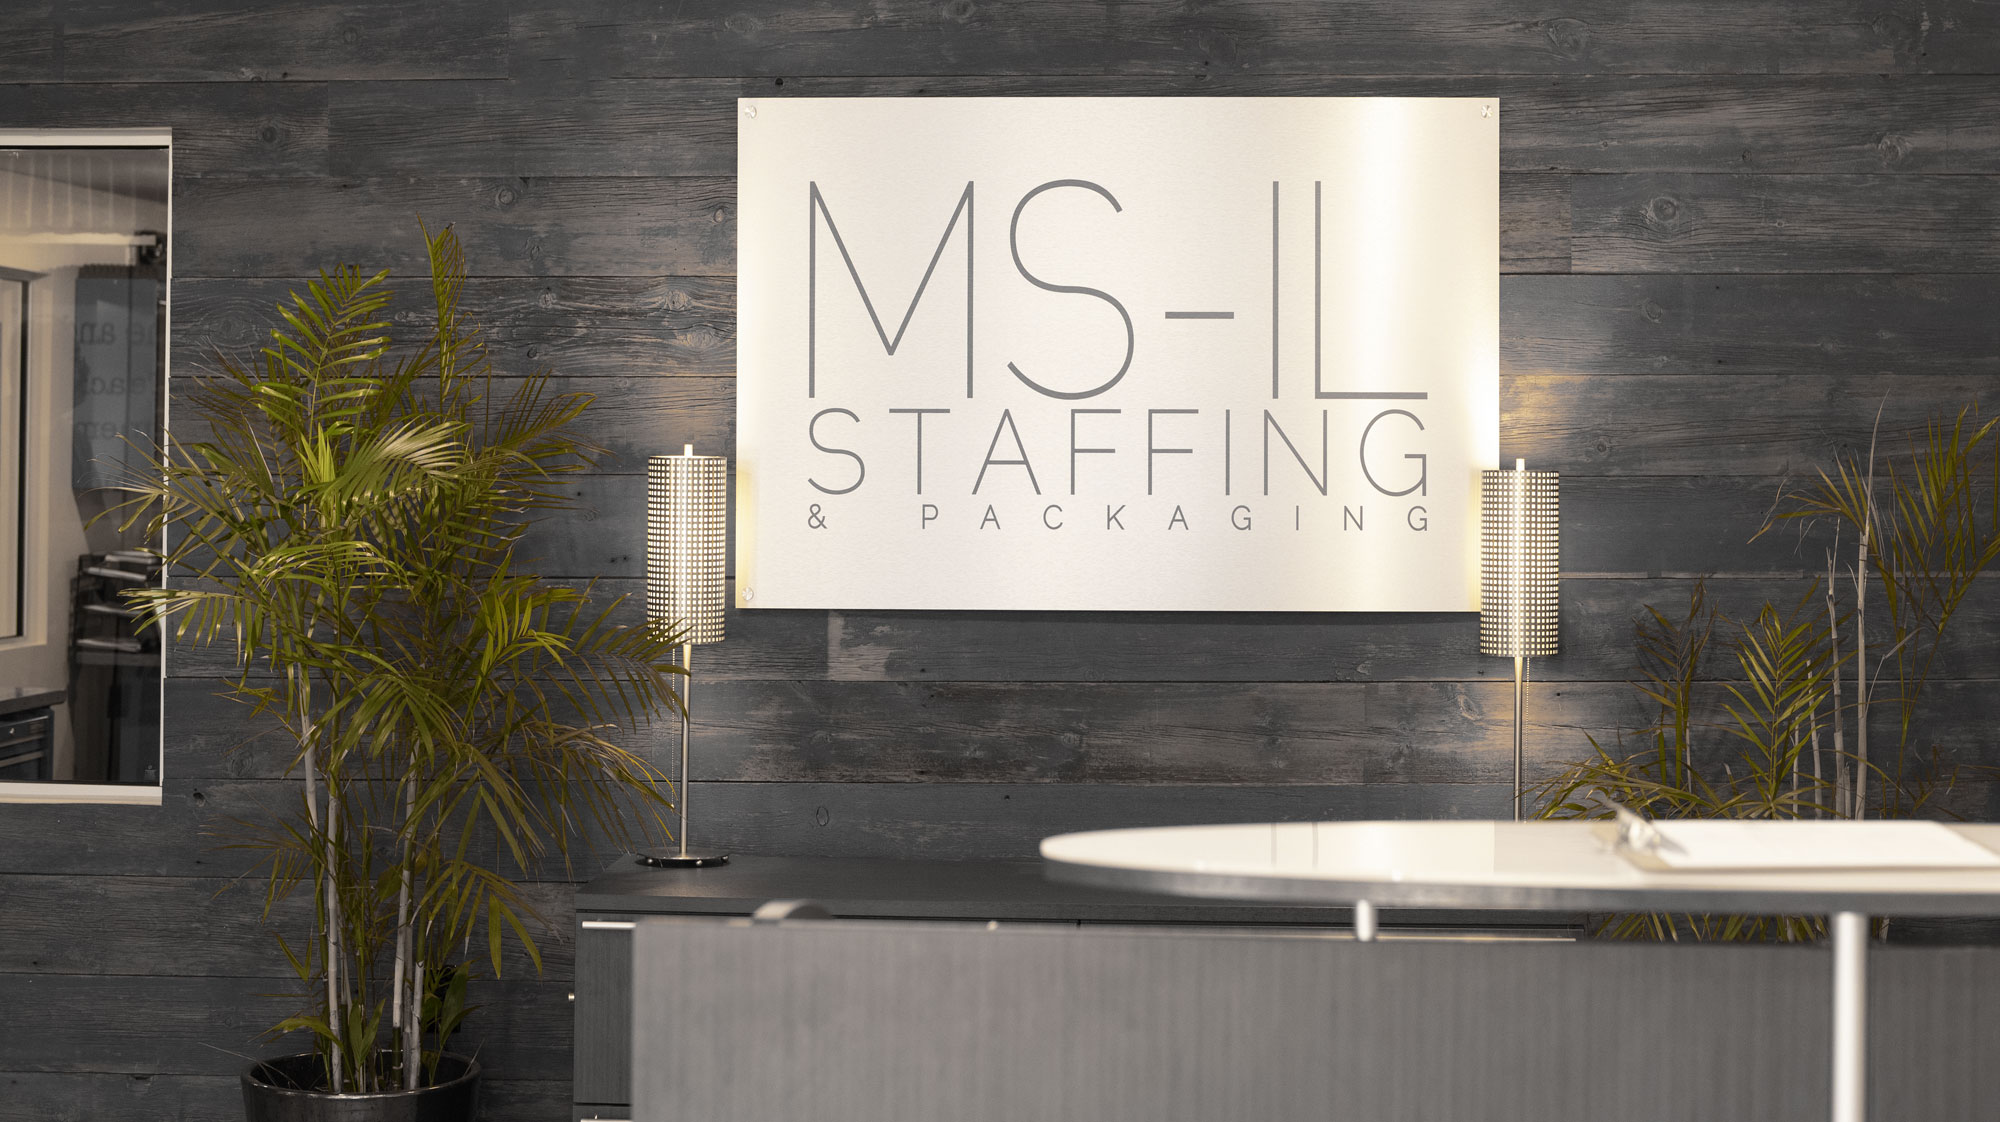 Careers At MS IL MS IL Staffing And Packaging